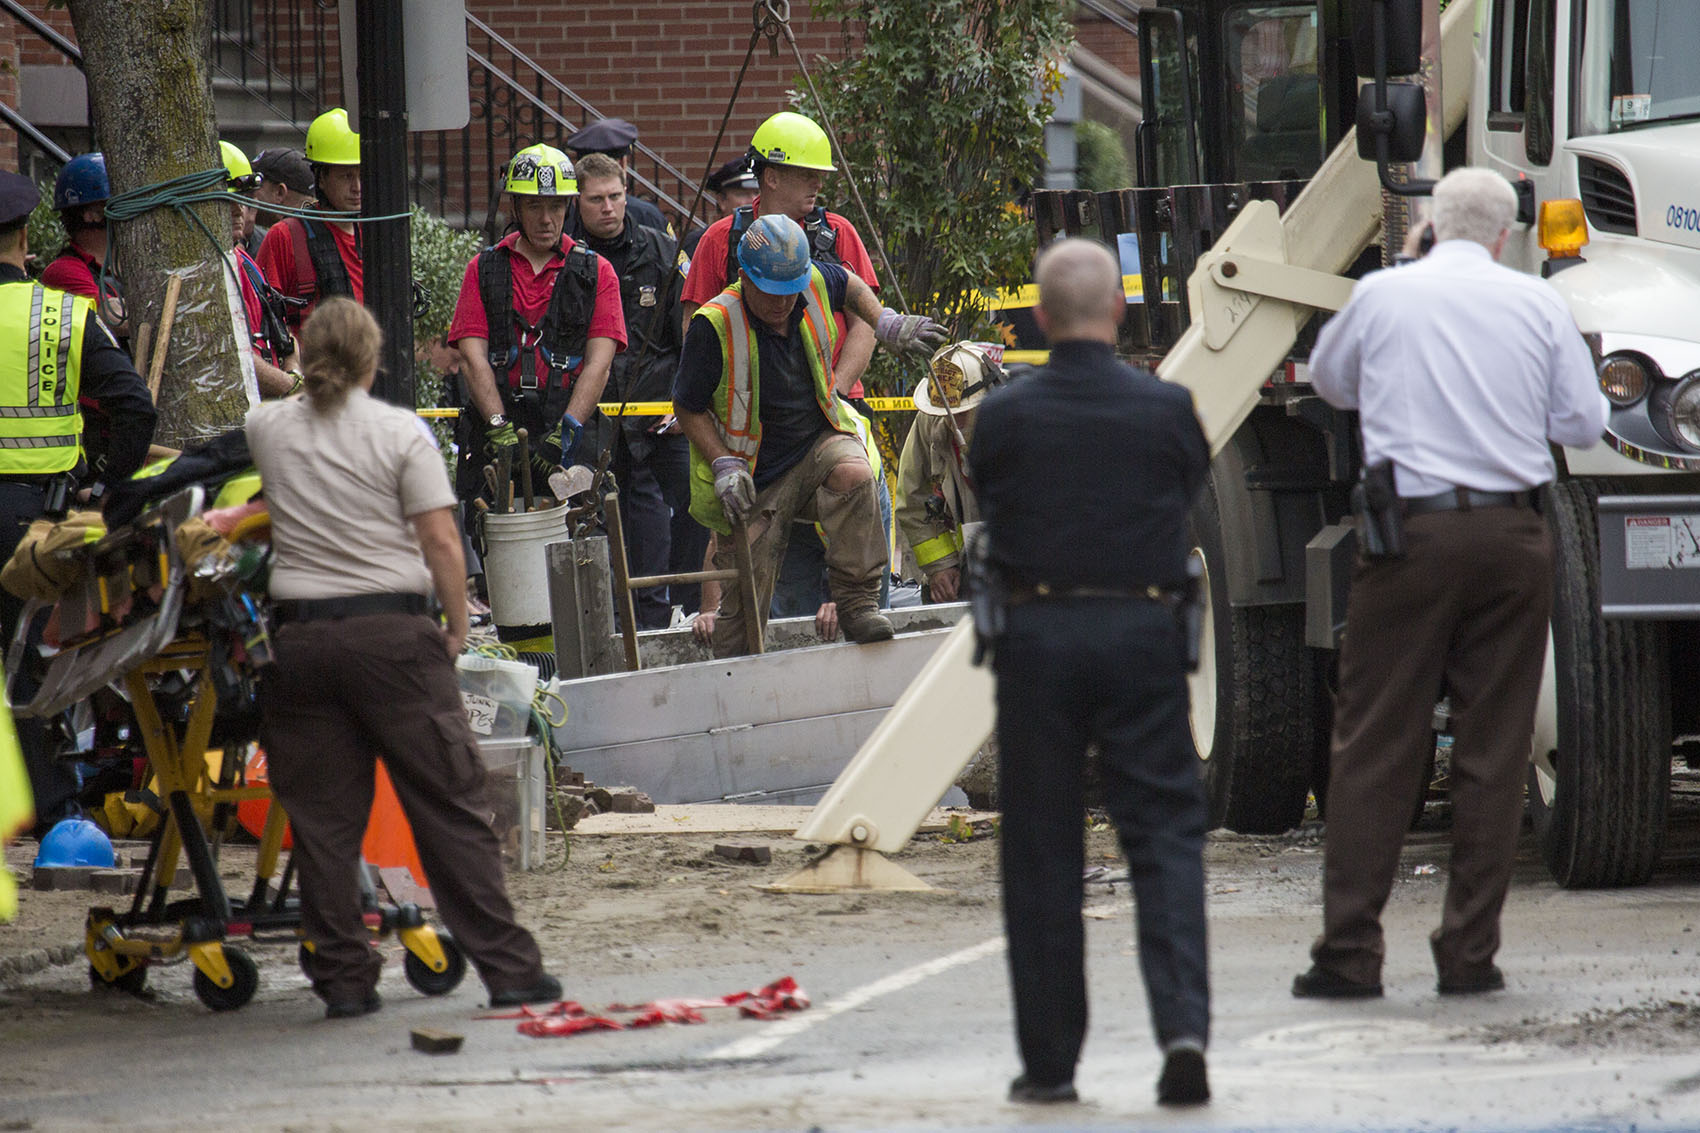 A response team works to recover the bodies of two men who were trapped in a trench during a water main break on Dartmouth Street in Boston's South End. (Jesse Costa/WBUR)